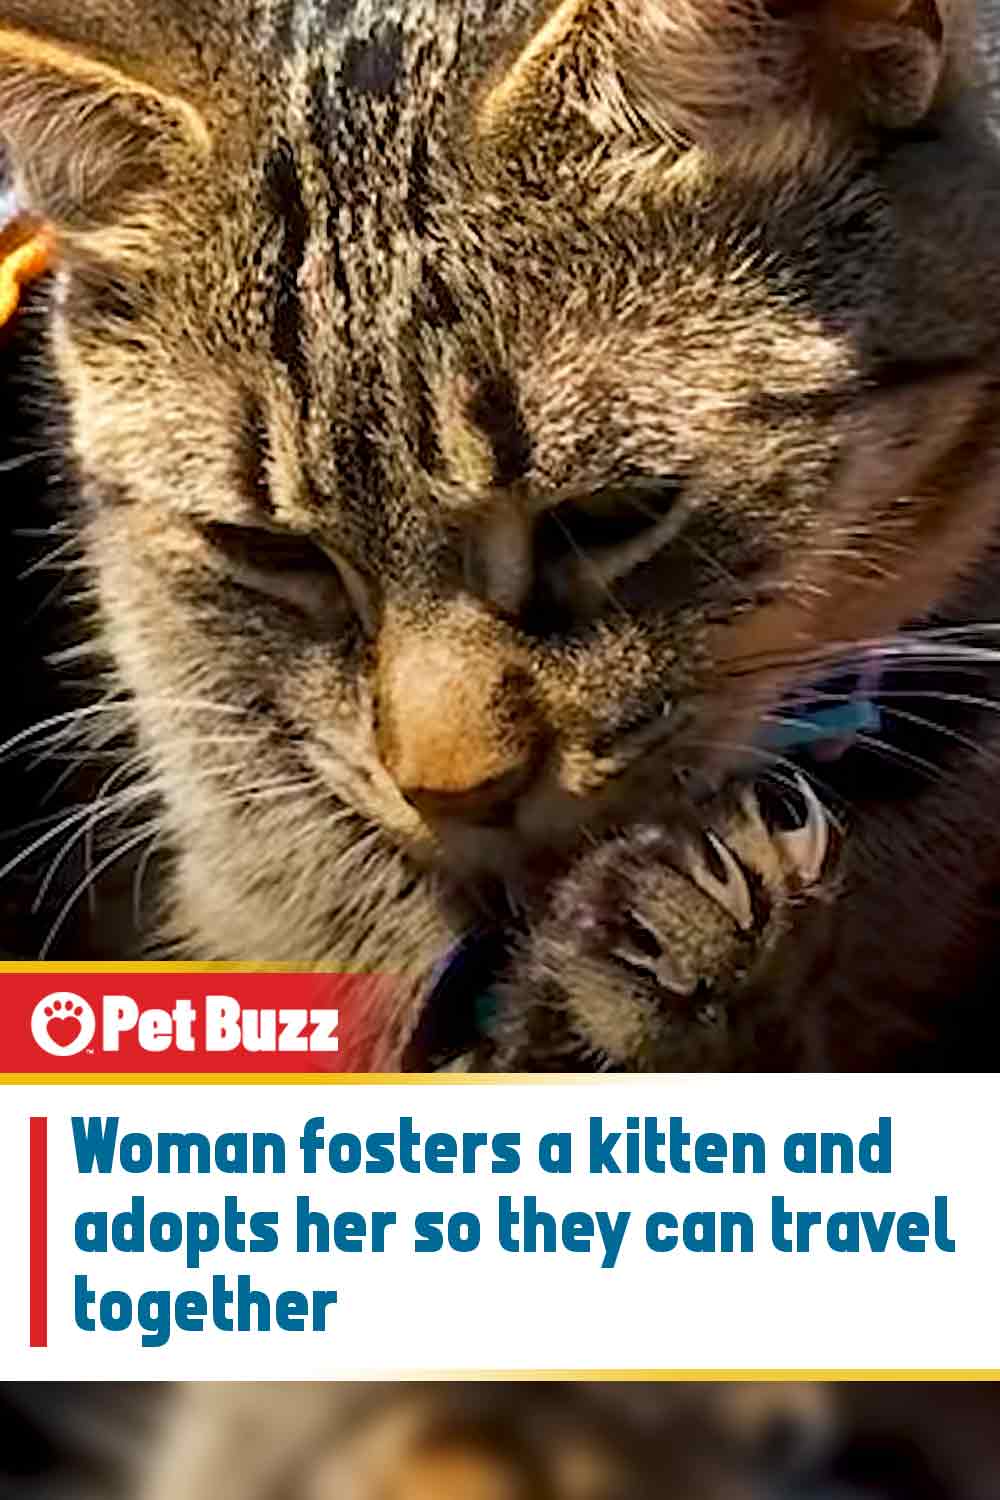 Woman fosters a kitten and adopts her so they can travel together